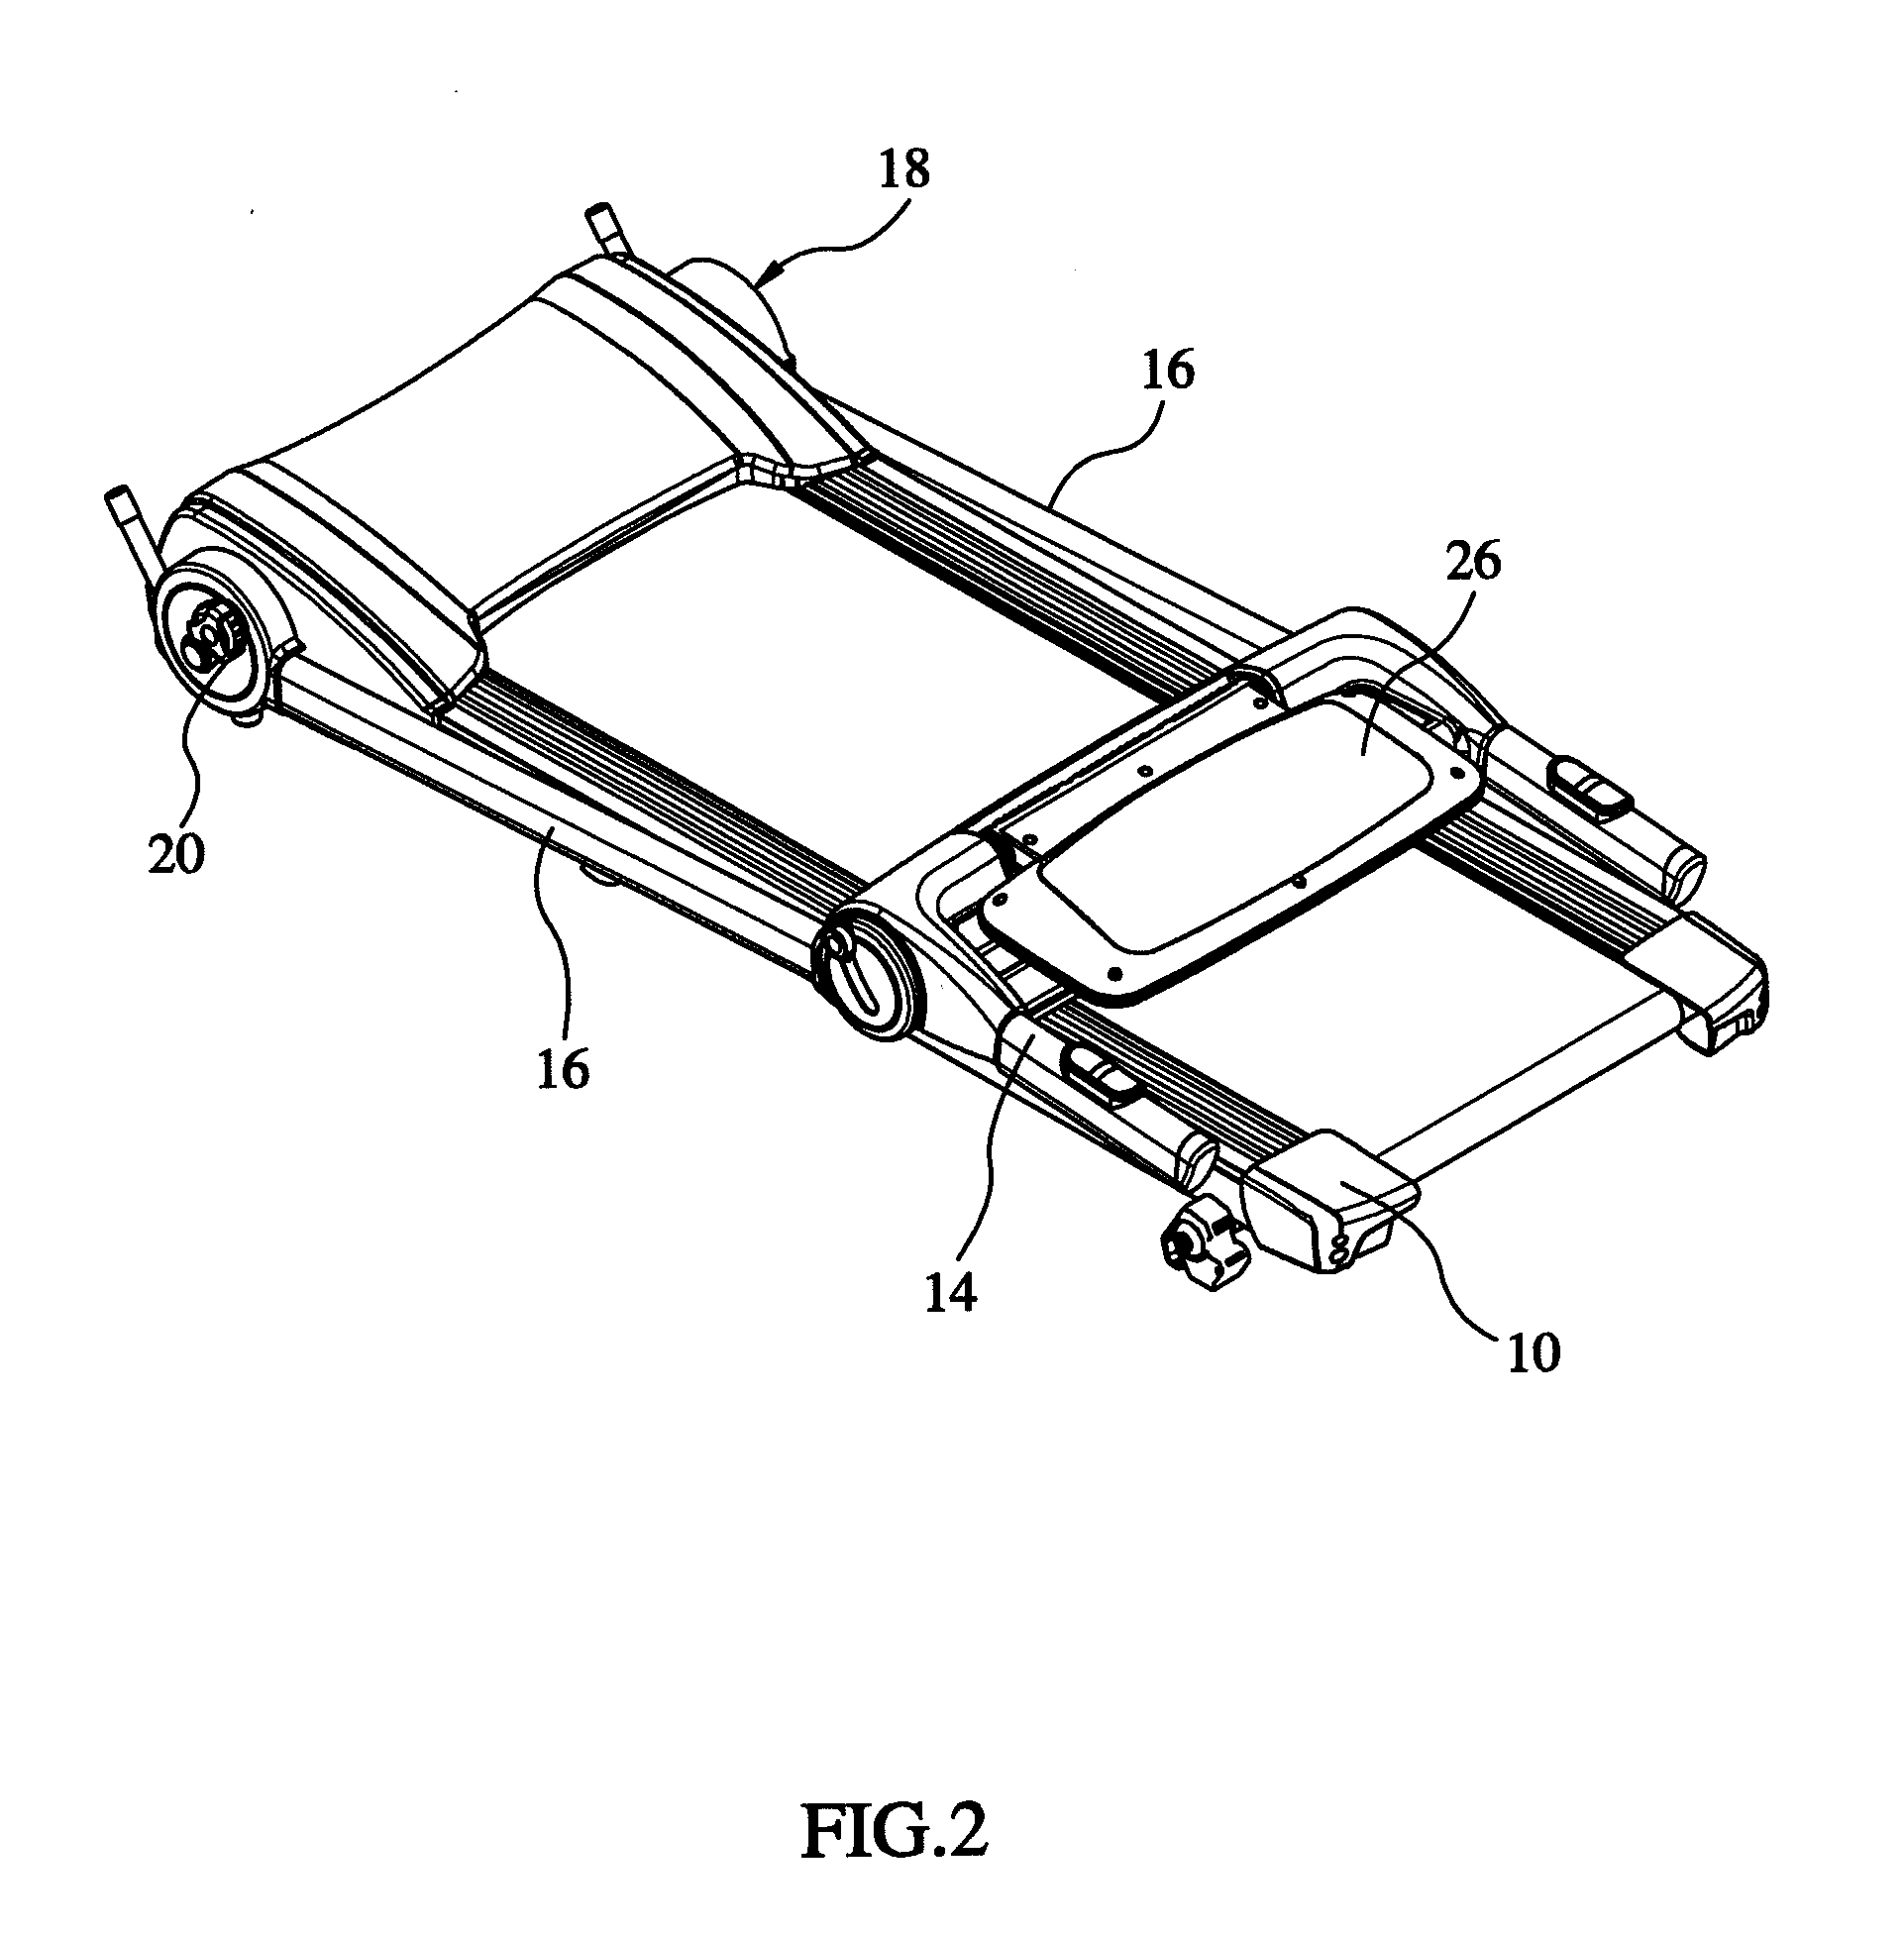 Collapsible mechanism for treadmill